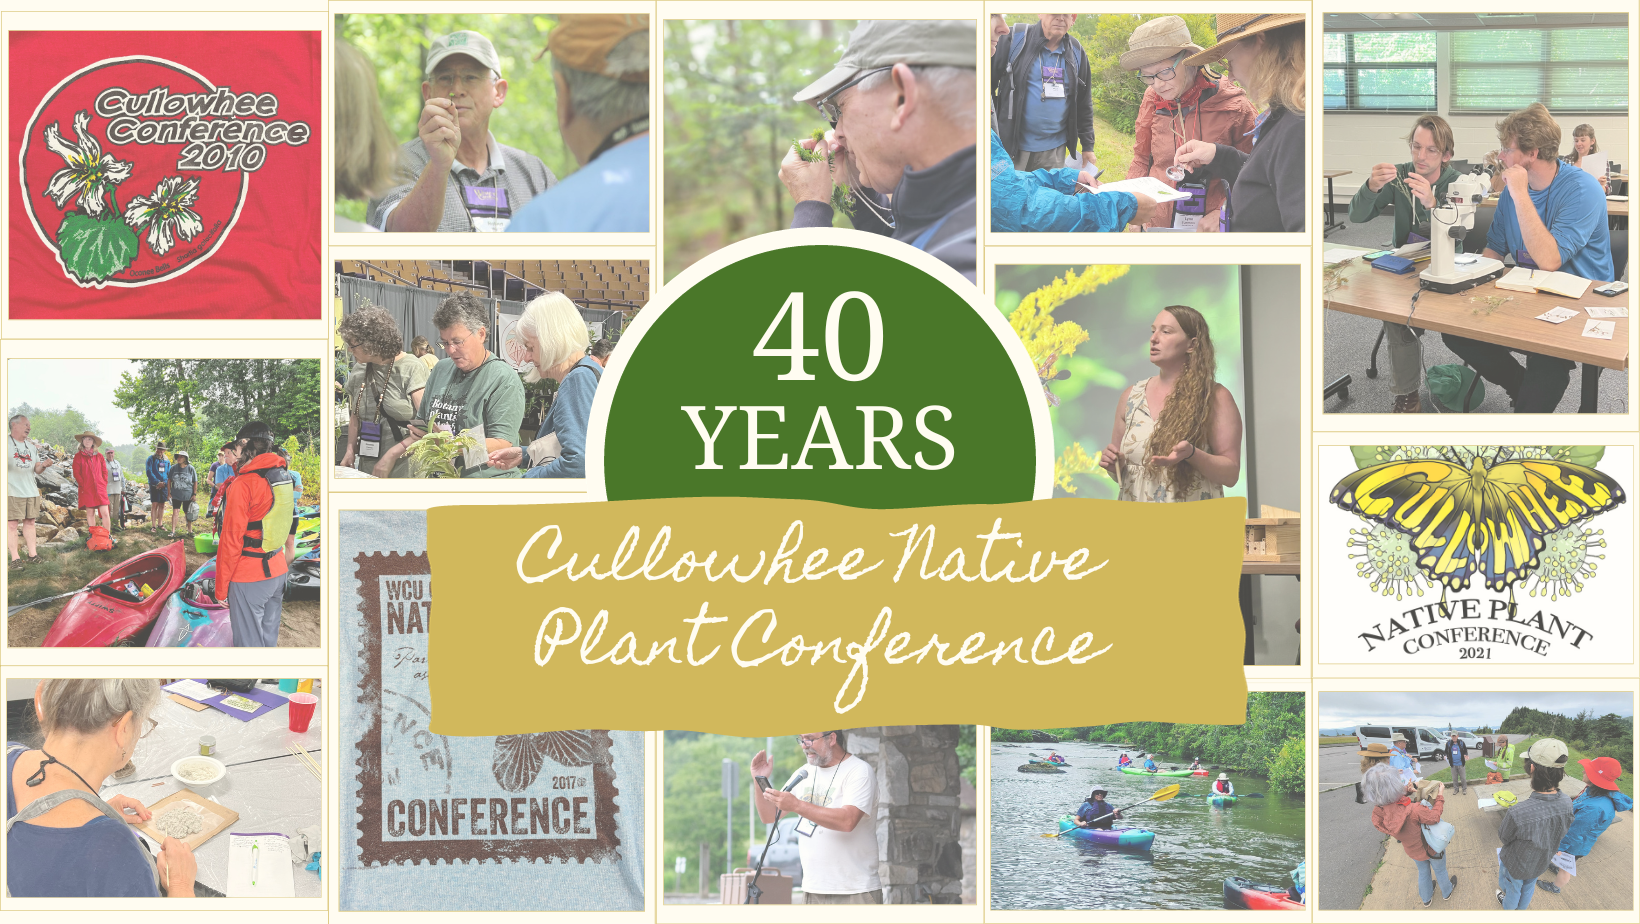 Native Plant Conference Collage from 2023 year conference and previous t-shirt designs. 40th year icon in middle 